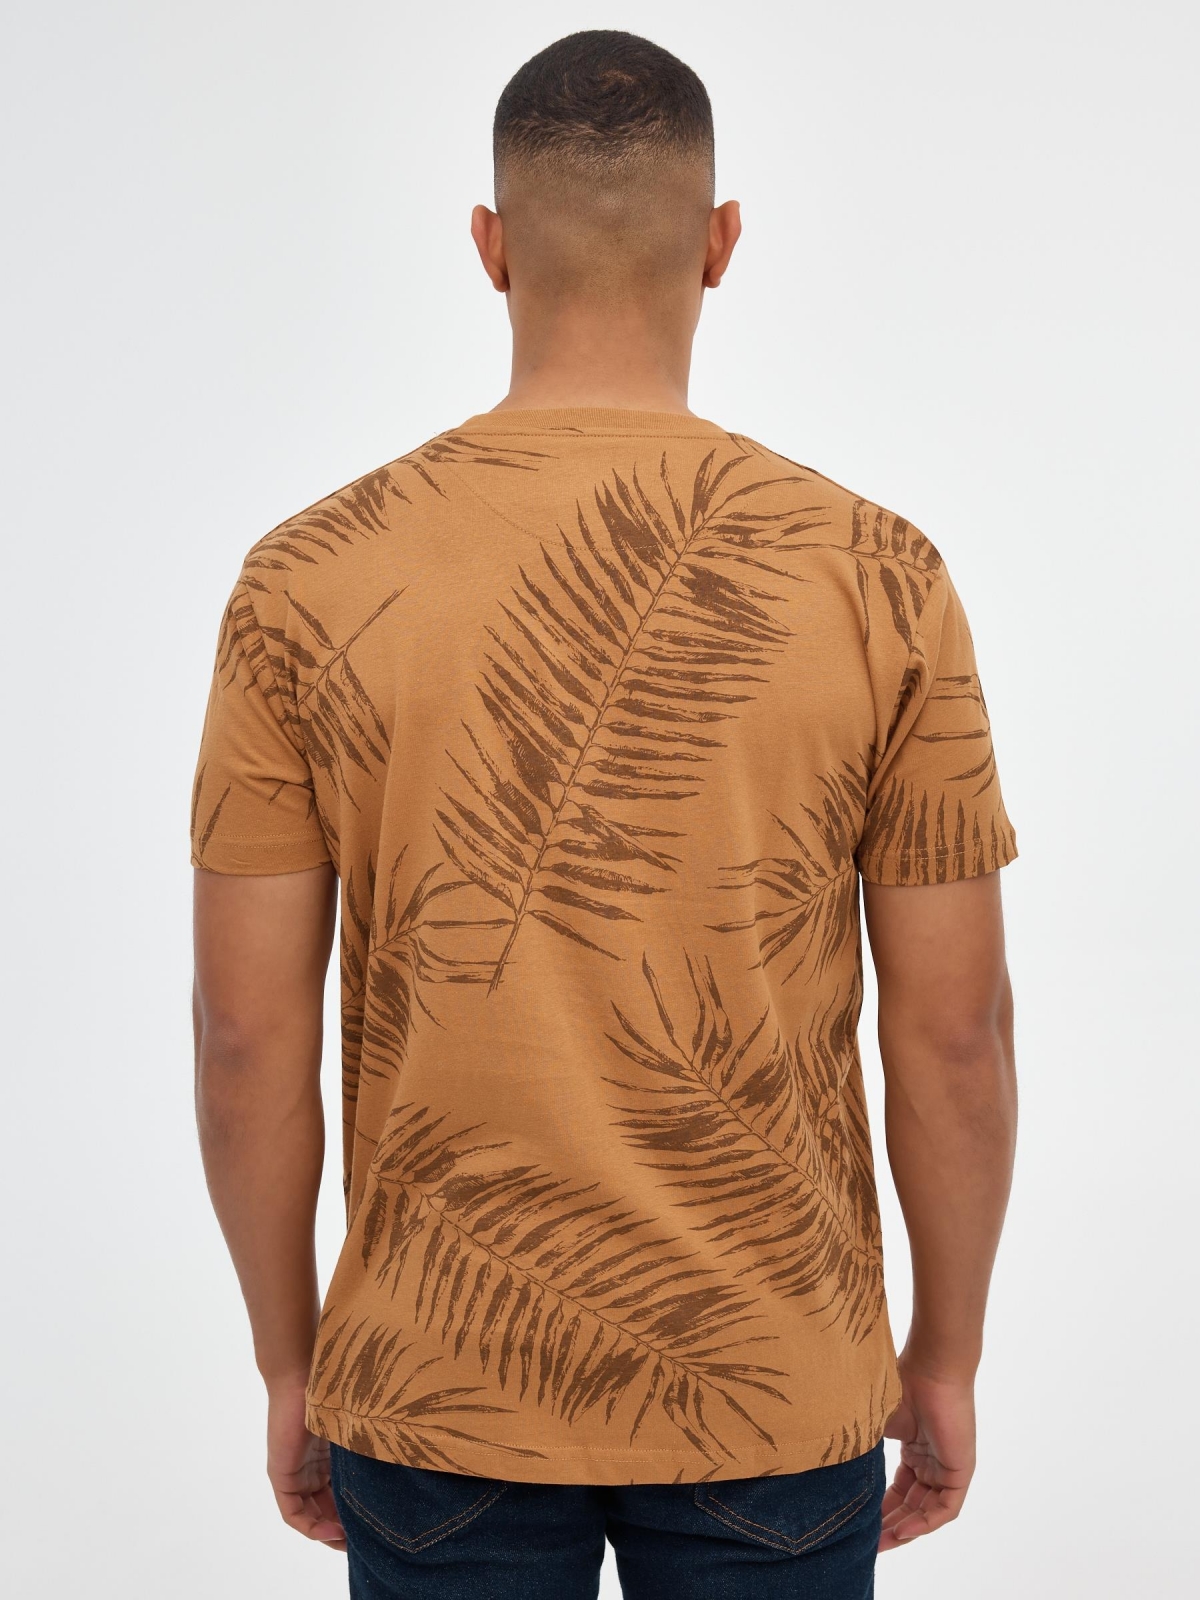 Palm leaves print t-shirt light brown middle back view